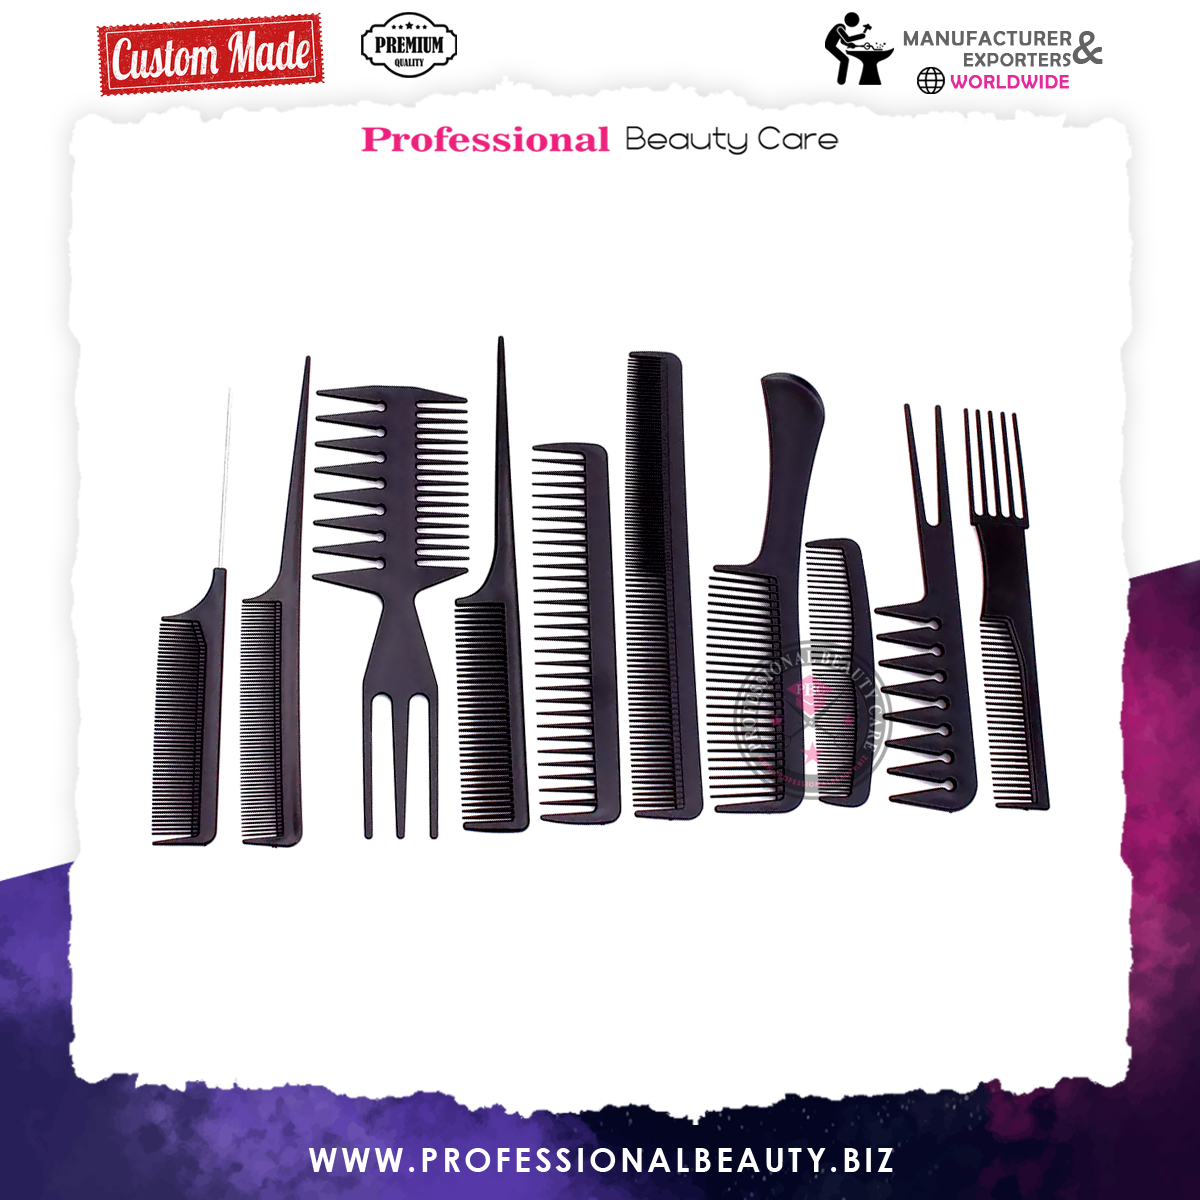 10 PCS Hair Stylists Professional Styling Comb Set Variety Pack Great for All Hair Types & Styles

#barbercollege #barberuniversity #cosmetologyeducation #thebarberpost #barbertutorial #barberia #nastybarbers #barbergang #usabarber #graciasdios🙏 #explorebarberpage #barberstudent